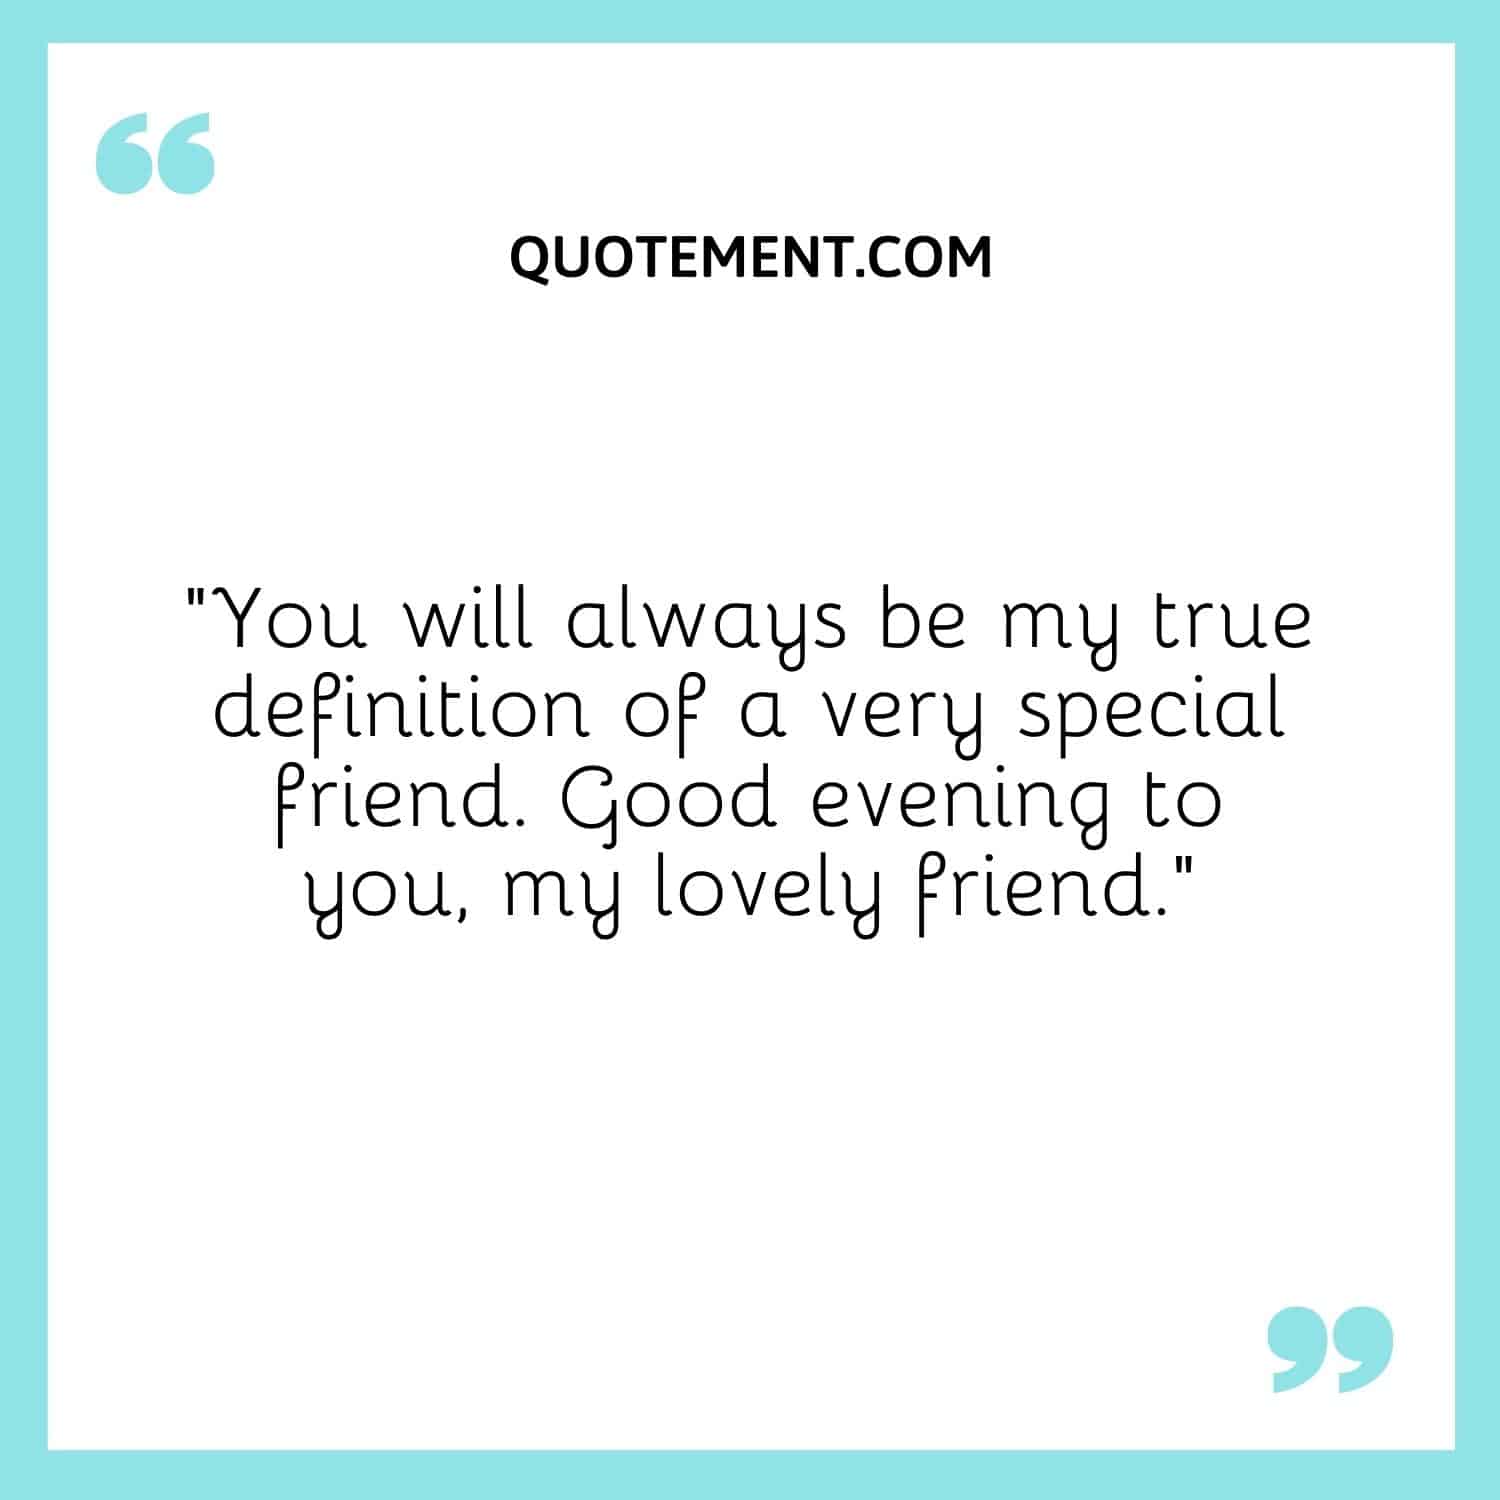 You will always be my true definition of a very special friend.